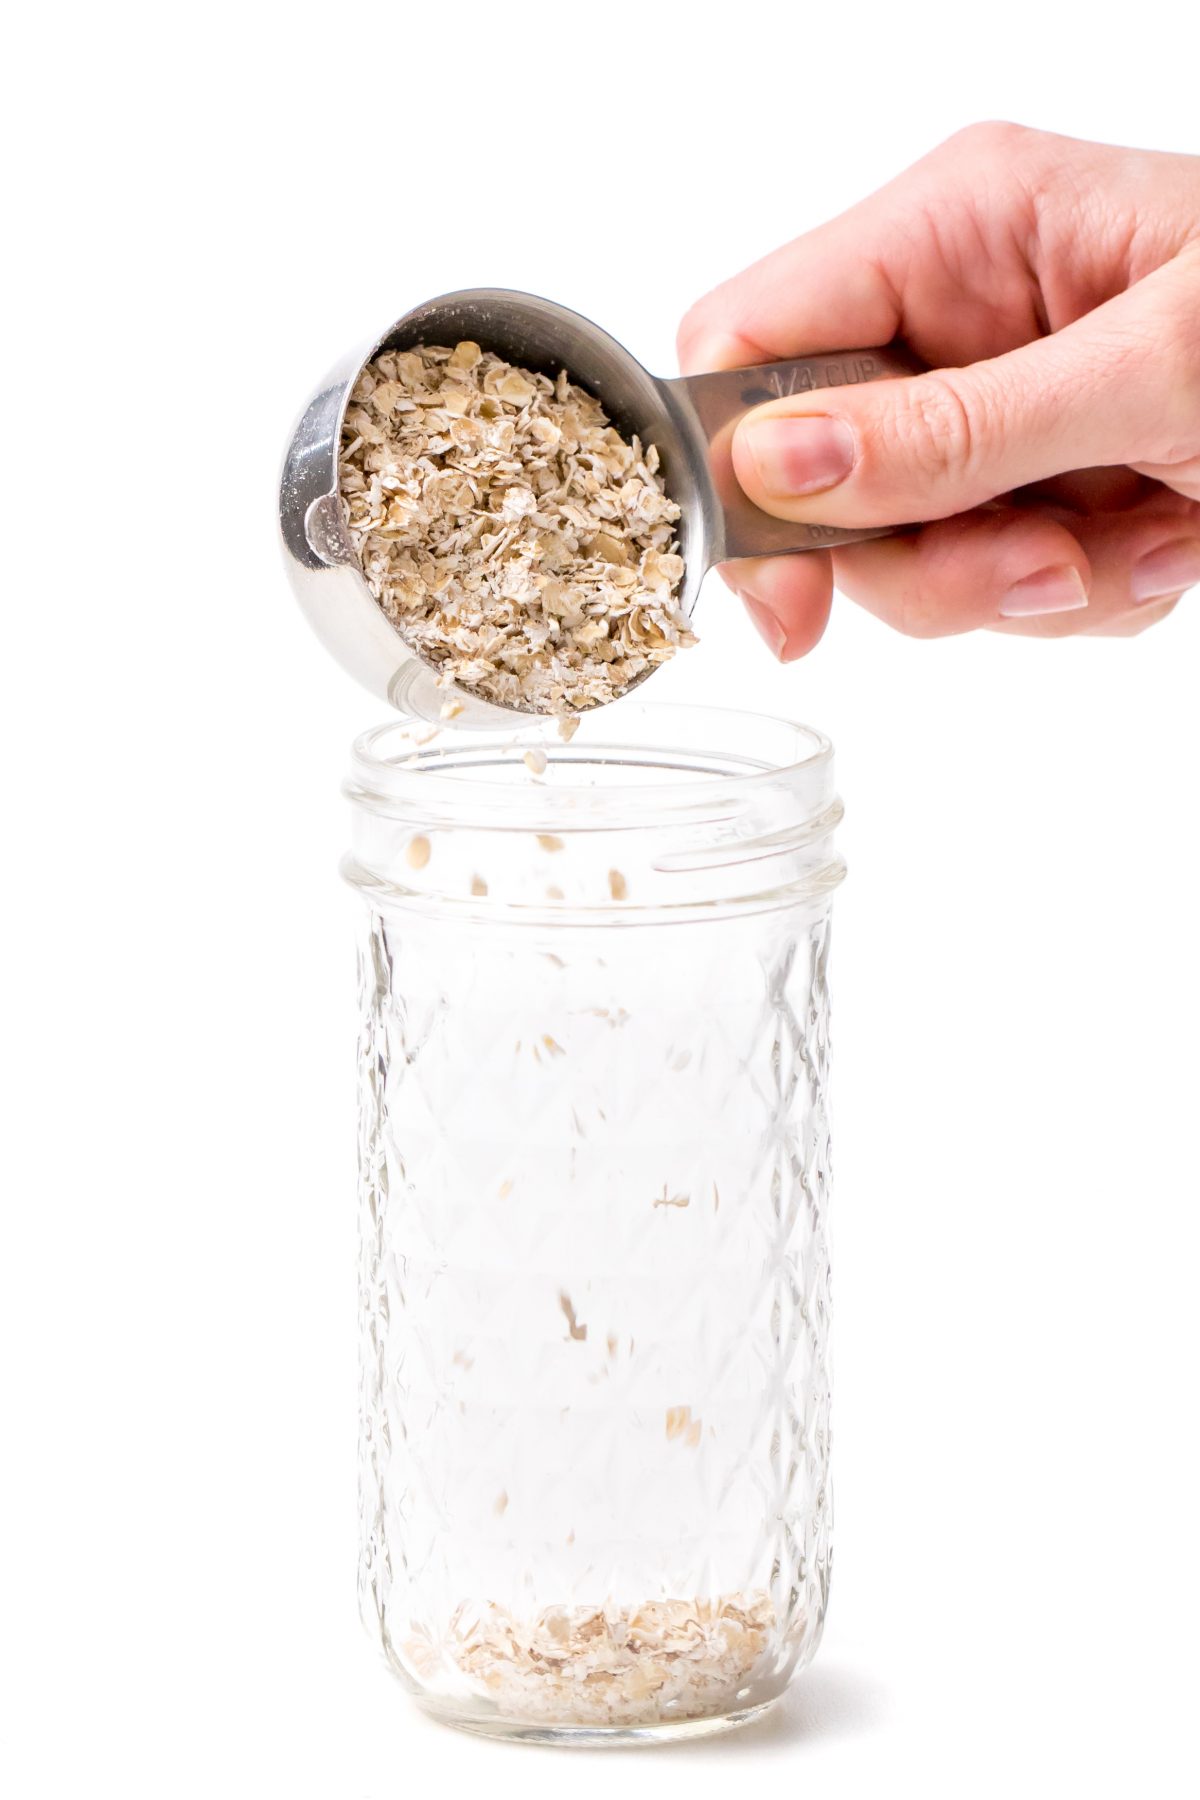 Place oats in jars